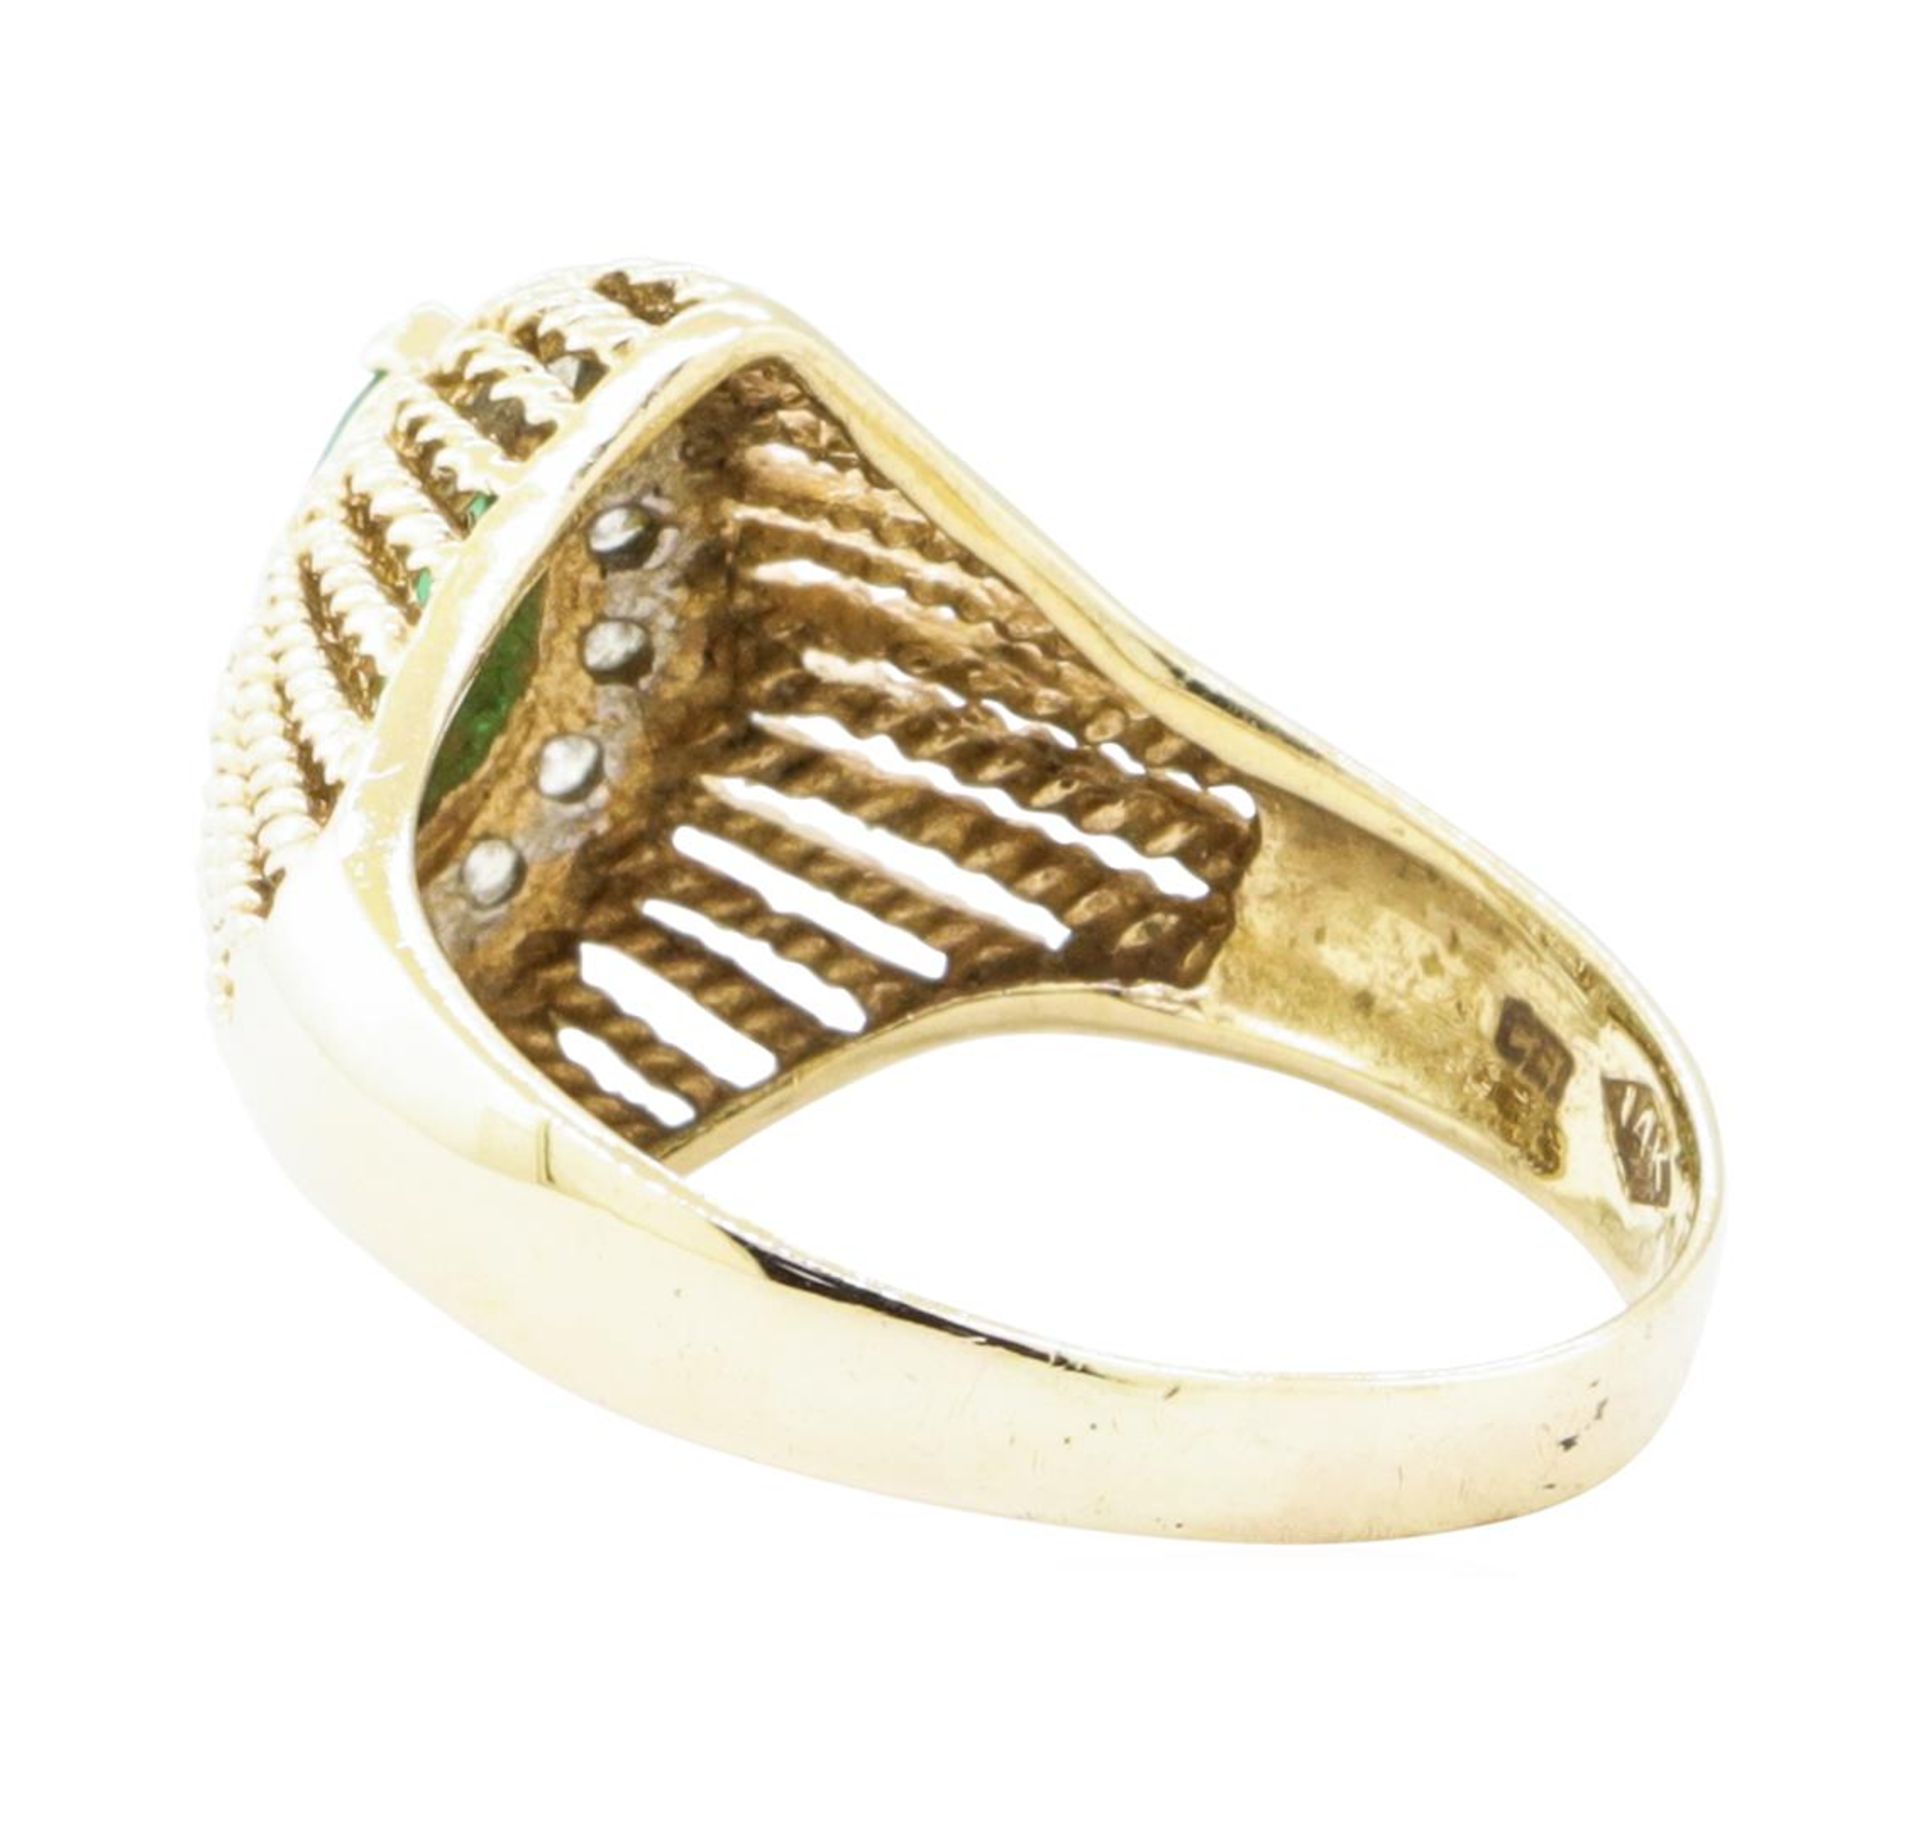 0.65 ctw Emerald And Diamond Ring - 14KT Yellow And White Gold - Image 3 of 5